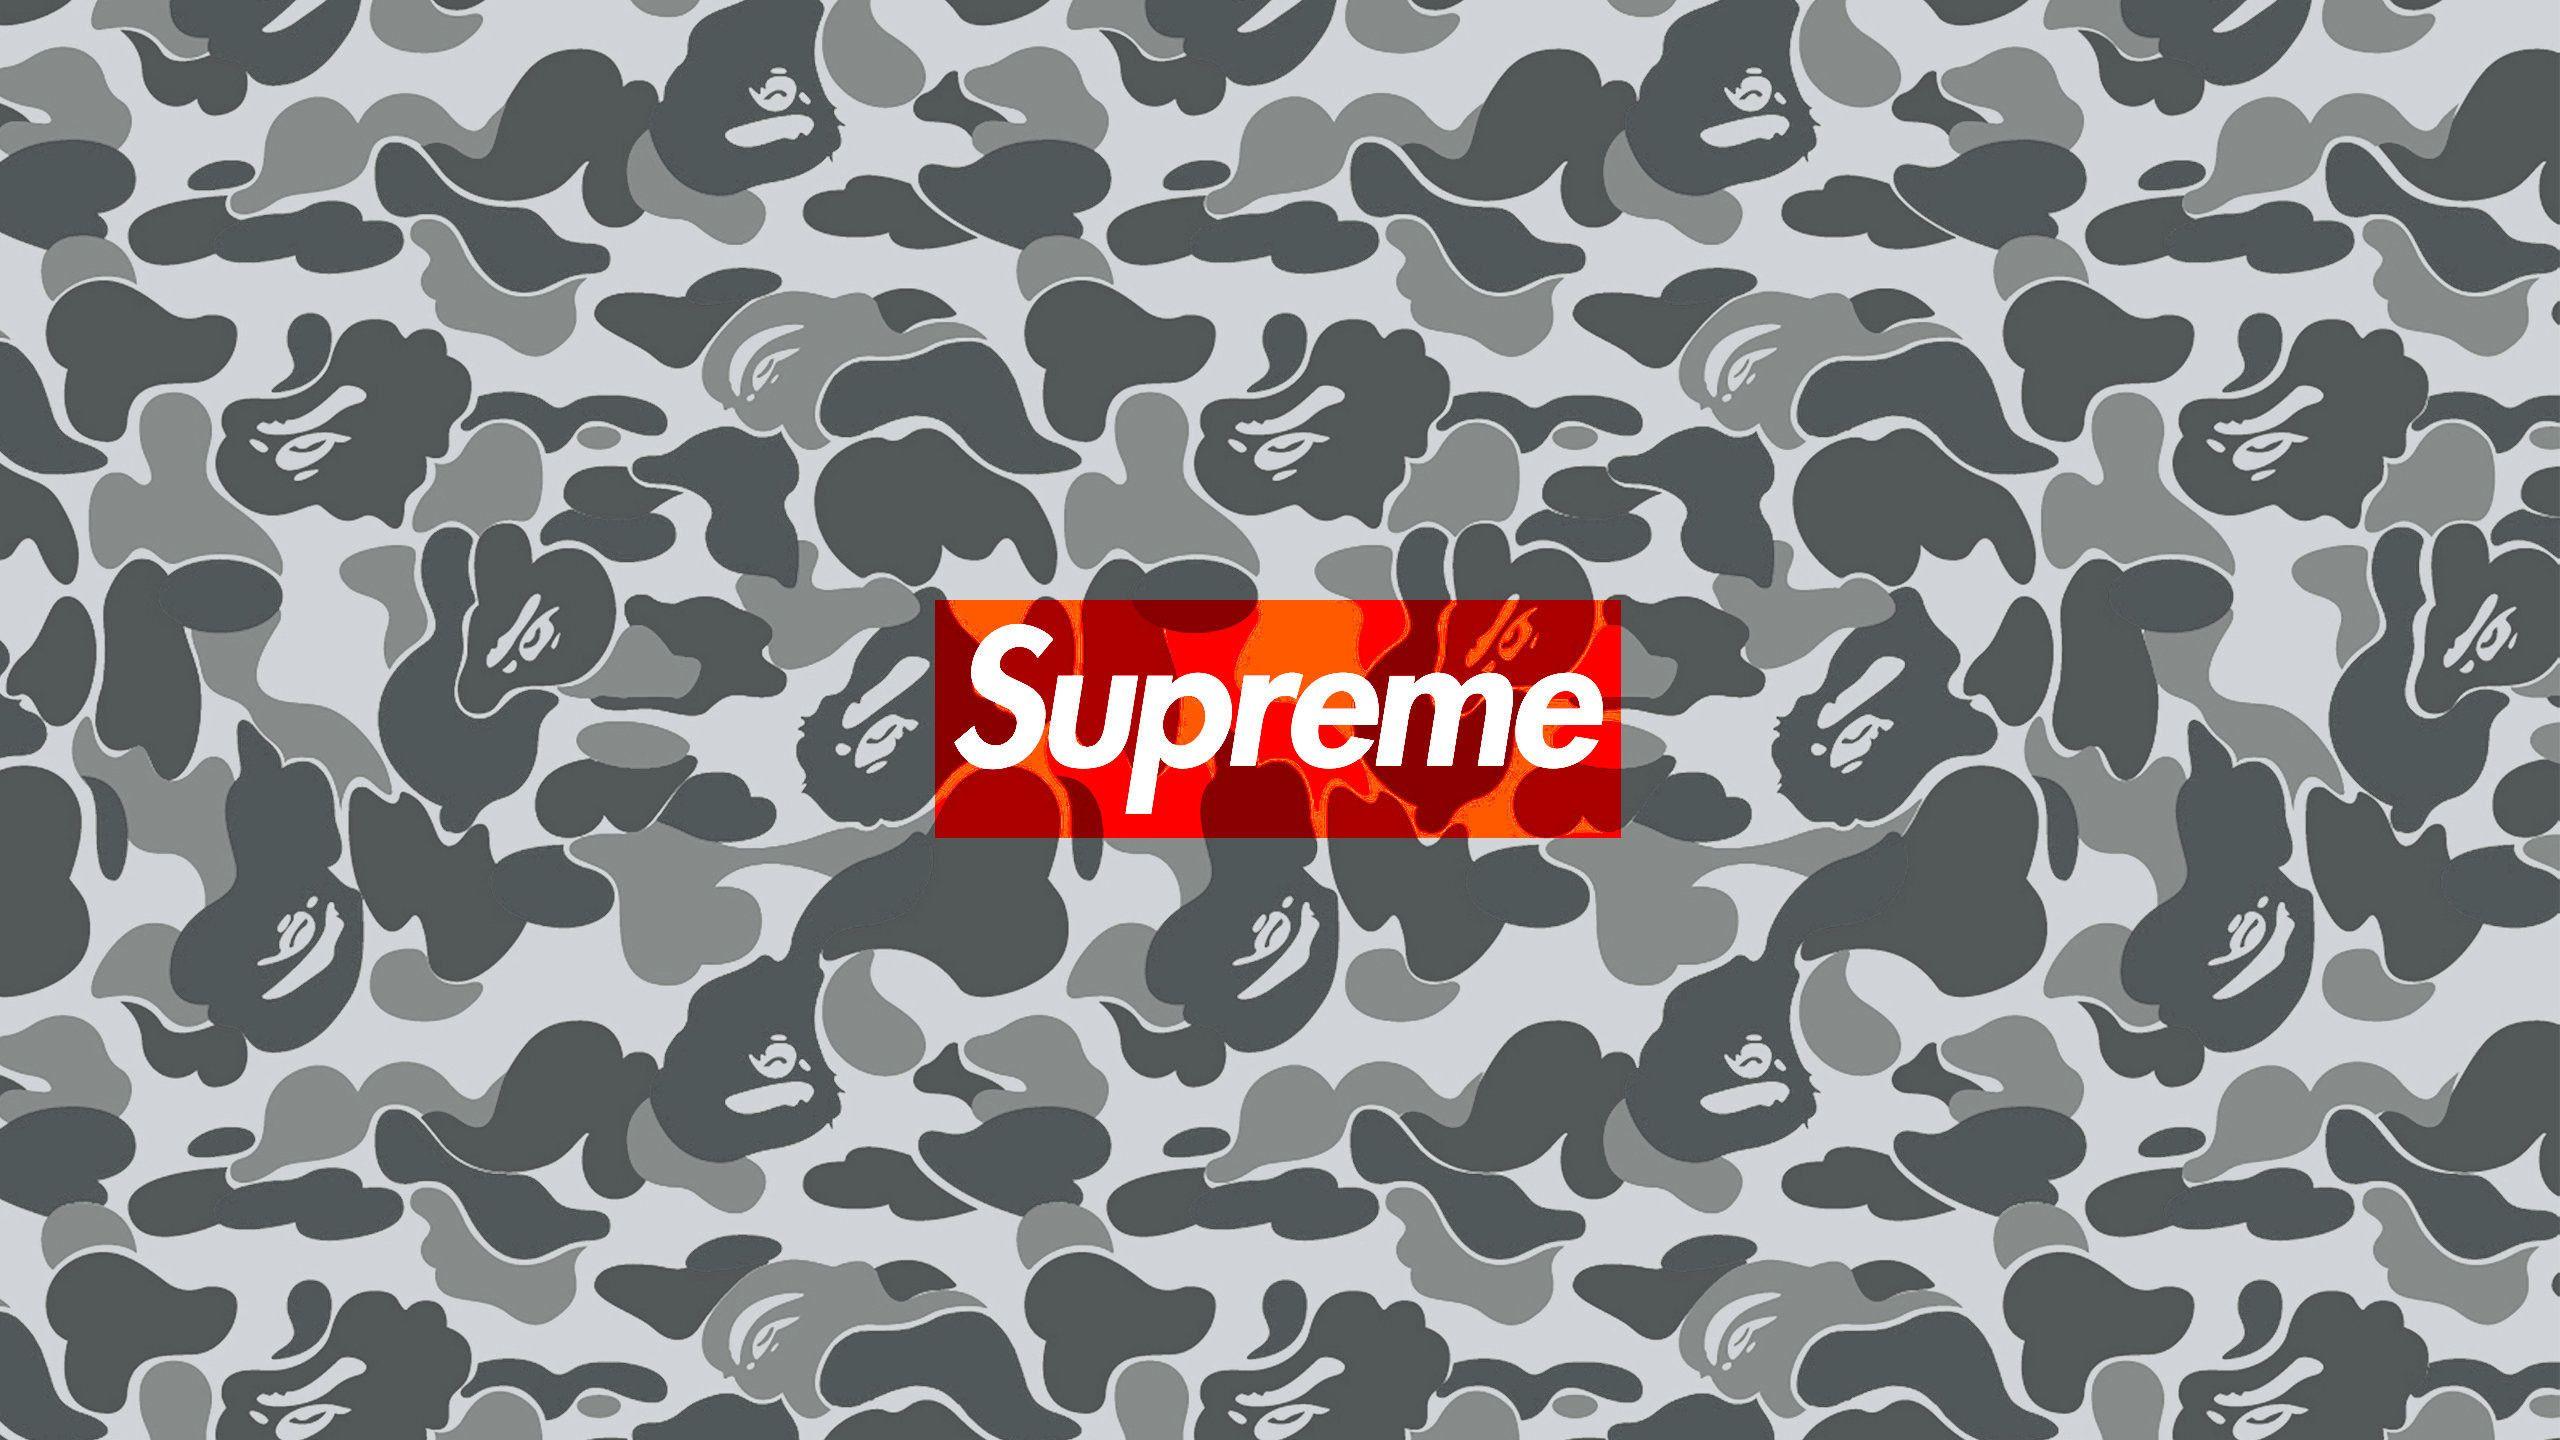 Download the Supreme Bape Camo wallpaper below for your mobile device (Android phones, iPhone etc.). Camo wallpaper, Supreme wallpaper, Bape wallpaper